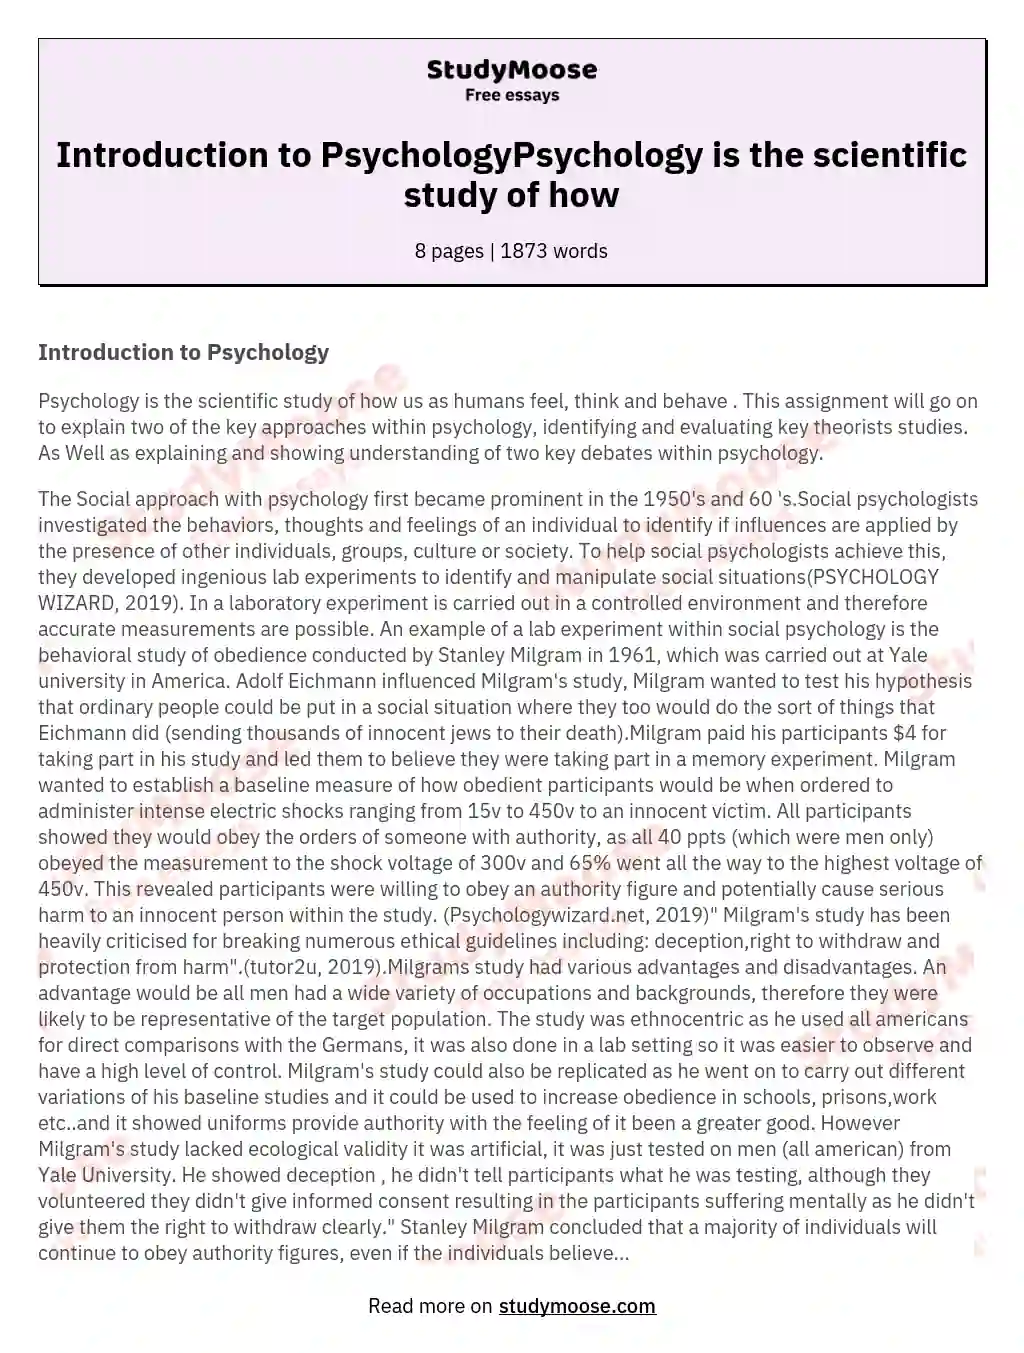 Introduction to PsychologyPsychology is the scientific study of how essay